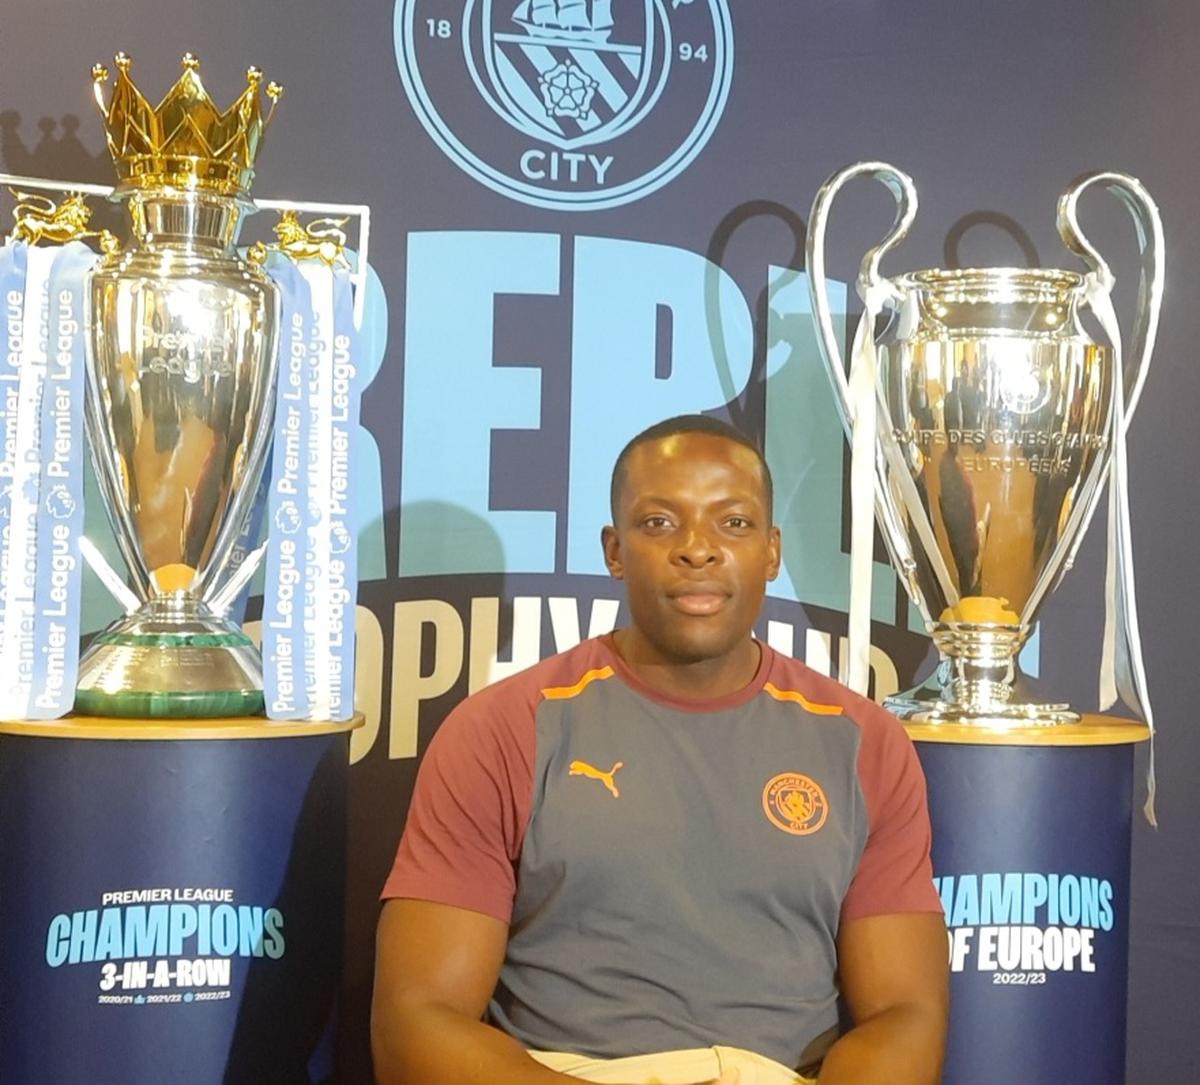 Nedum Onuoha, who is part of the tour, at a Manchester City event in Kochi.